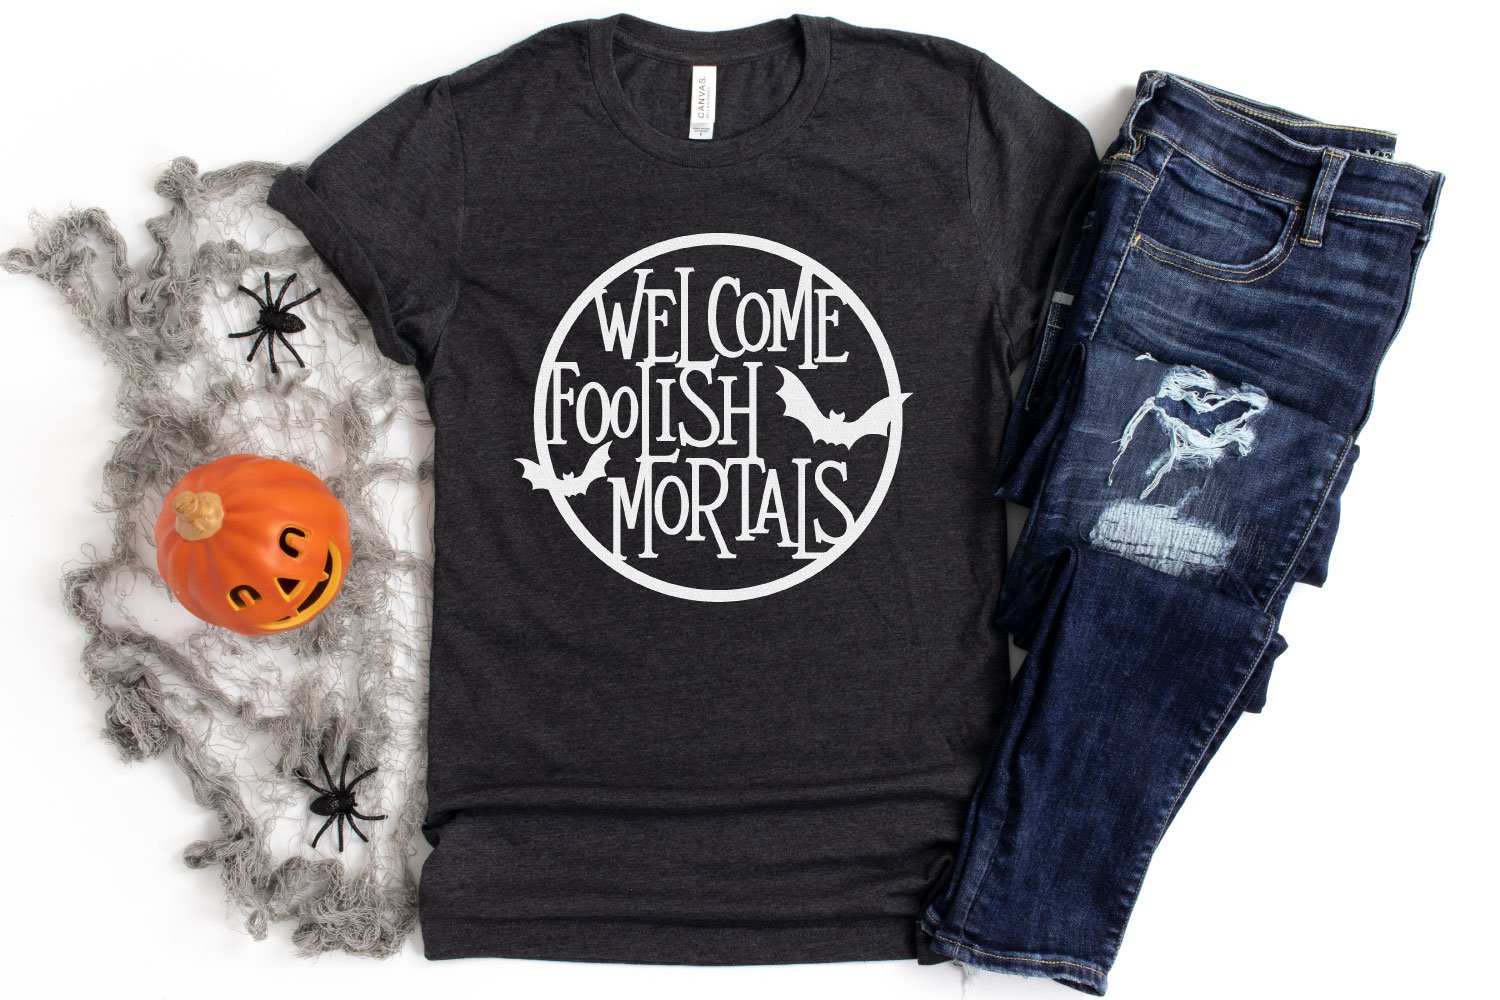 Image of a black t-shirt with quote in white vinyl stating \"Welcome Foolish Mortals\" encased within a white vinyl cirlce and two white bats.  A pair of blue jeans and some Halloween decor are next to the t-shirt